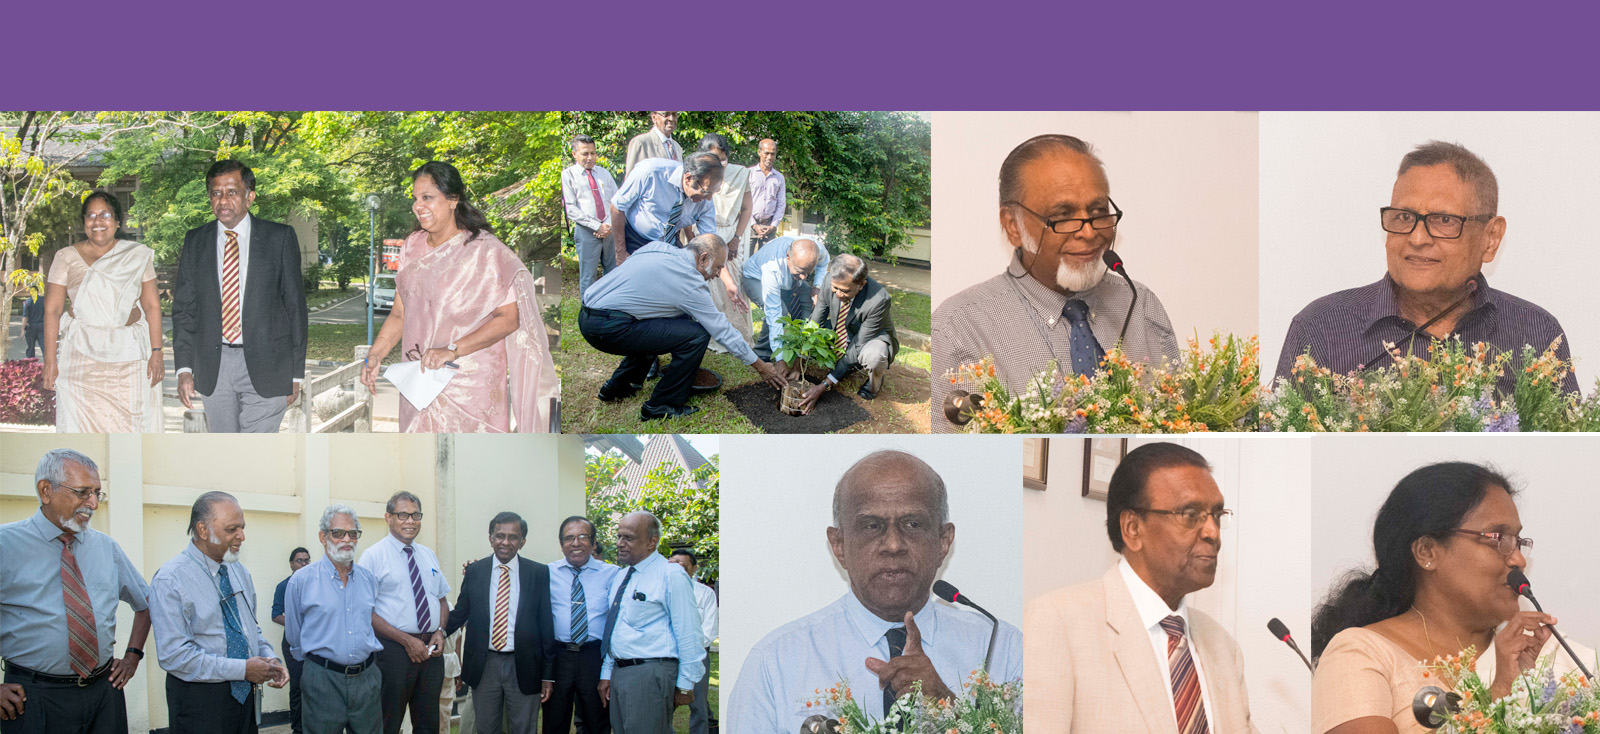 50th Anniversary celebration of the Medical Education Unit